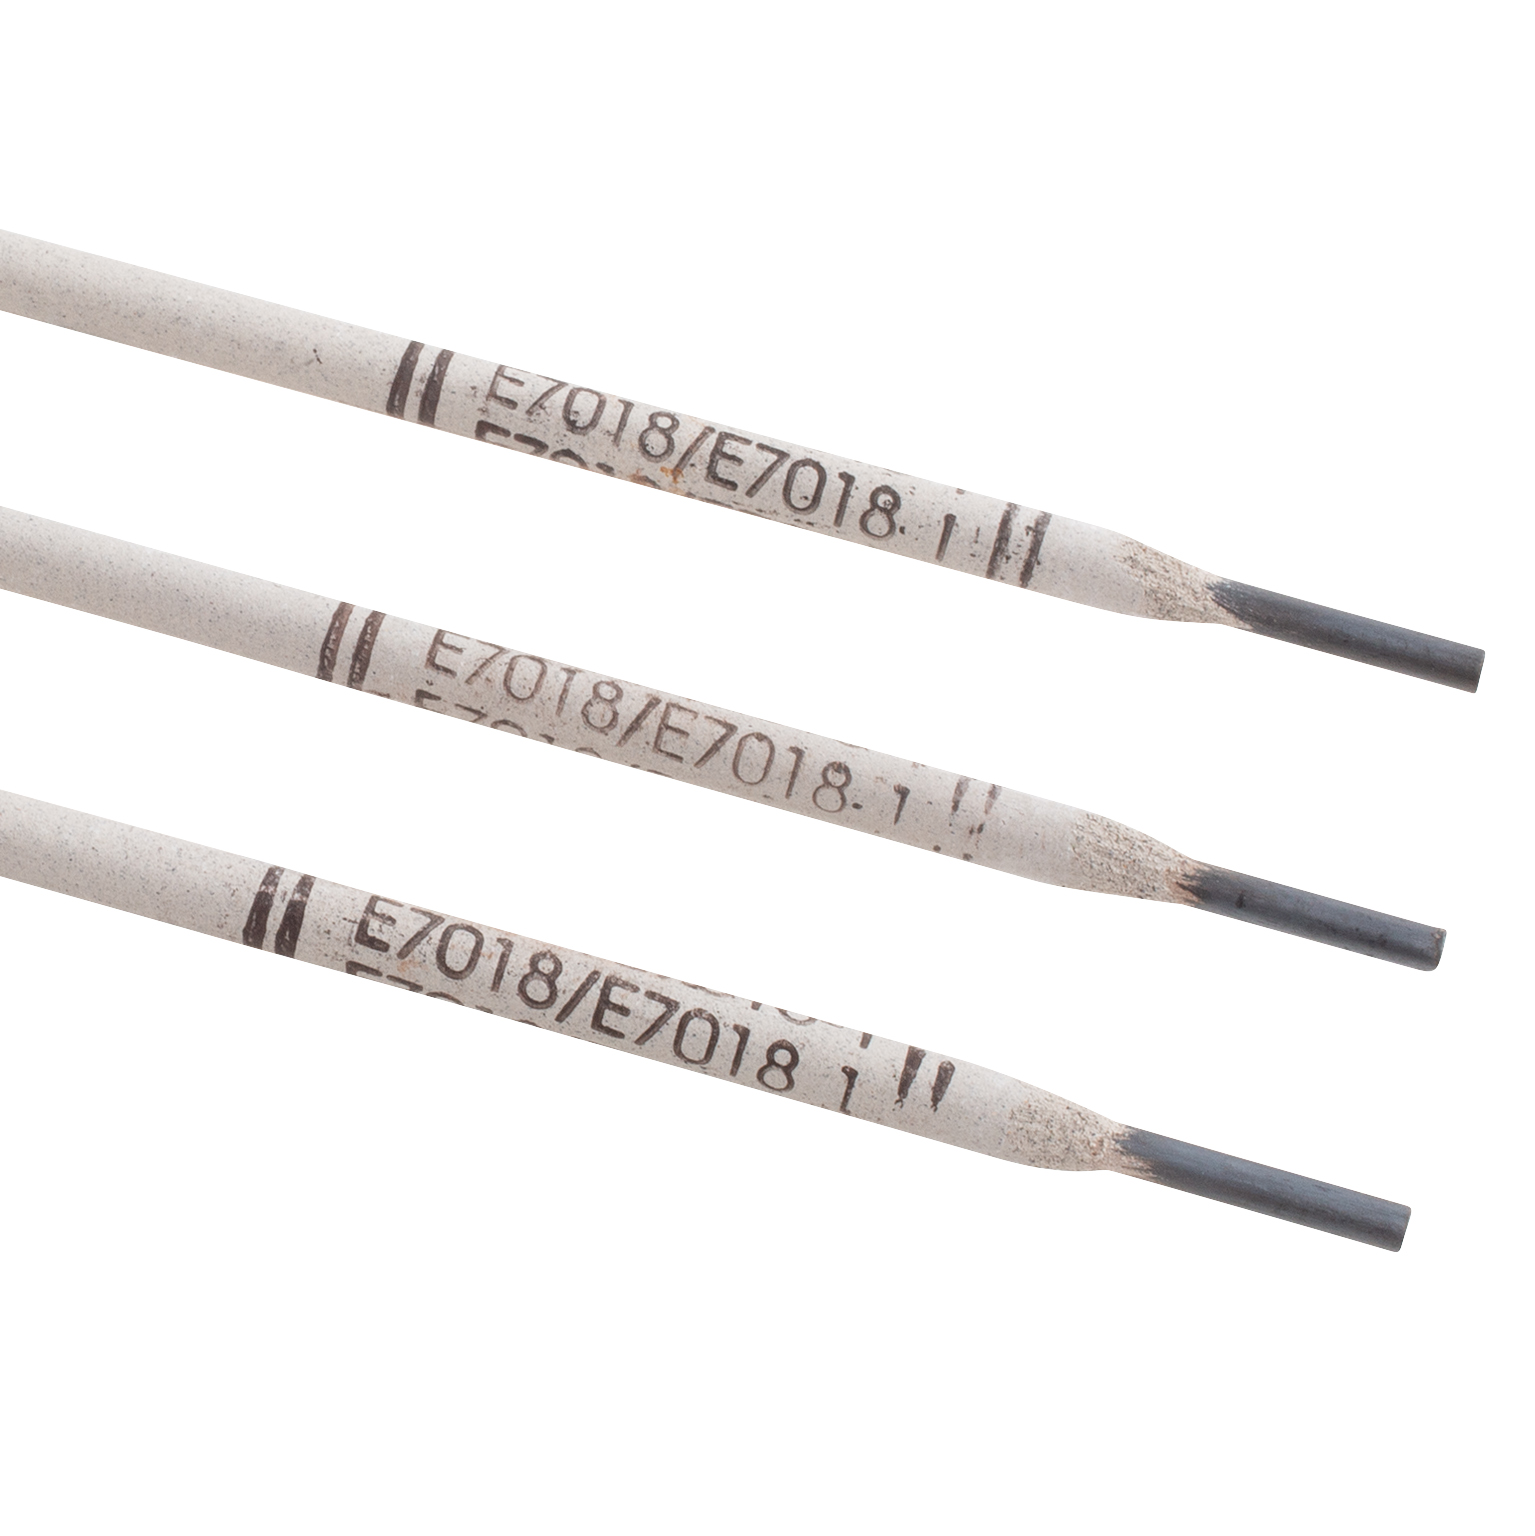 E7018 All position, low hydrogen electrode-5/32 in. - 50 lb.